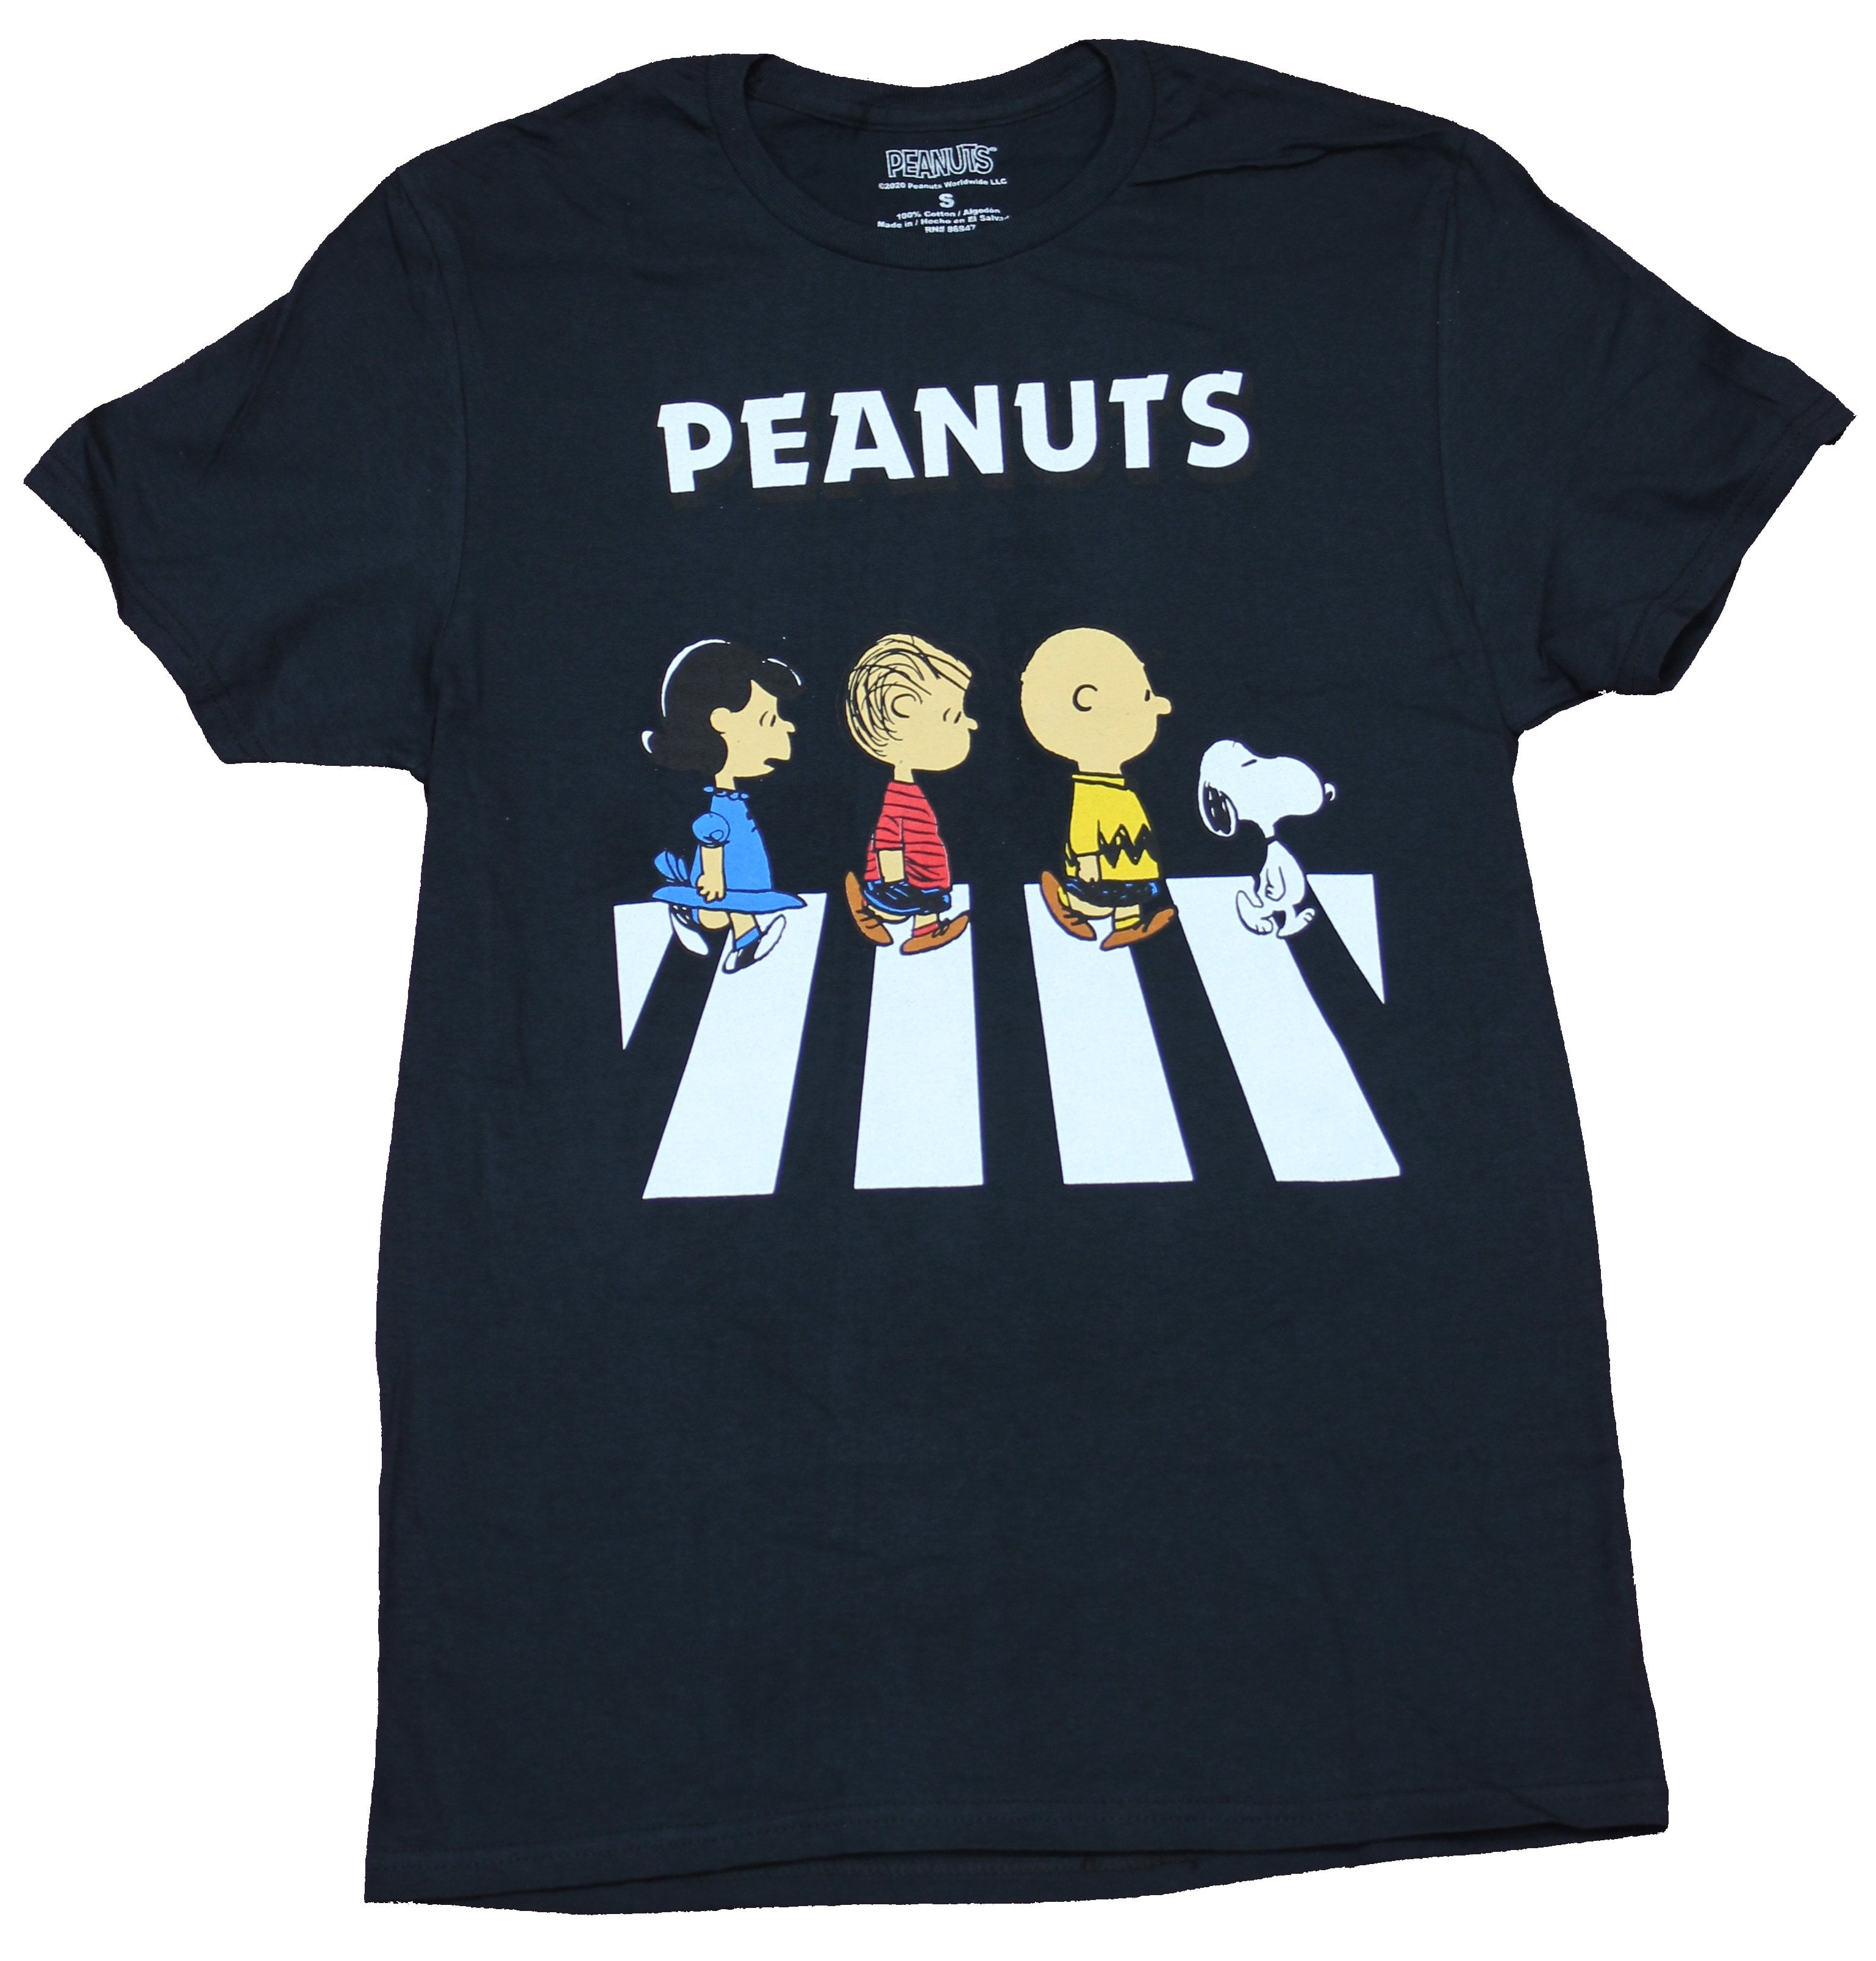 Details about   NWT TODDLER GIRL PEANUTS CHRISTMAS SHIRT SIZE 4T 